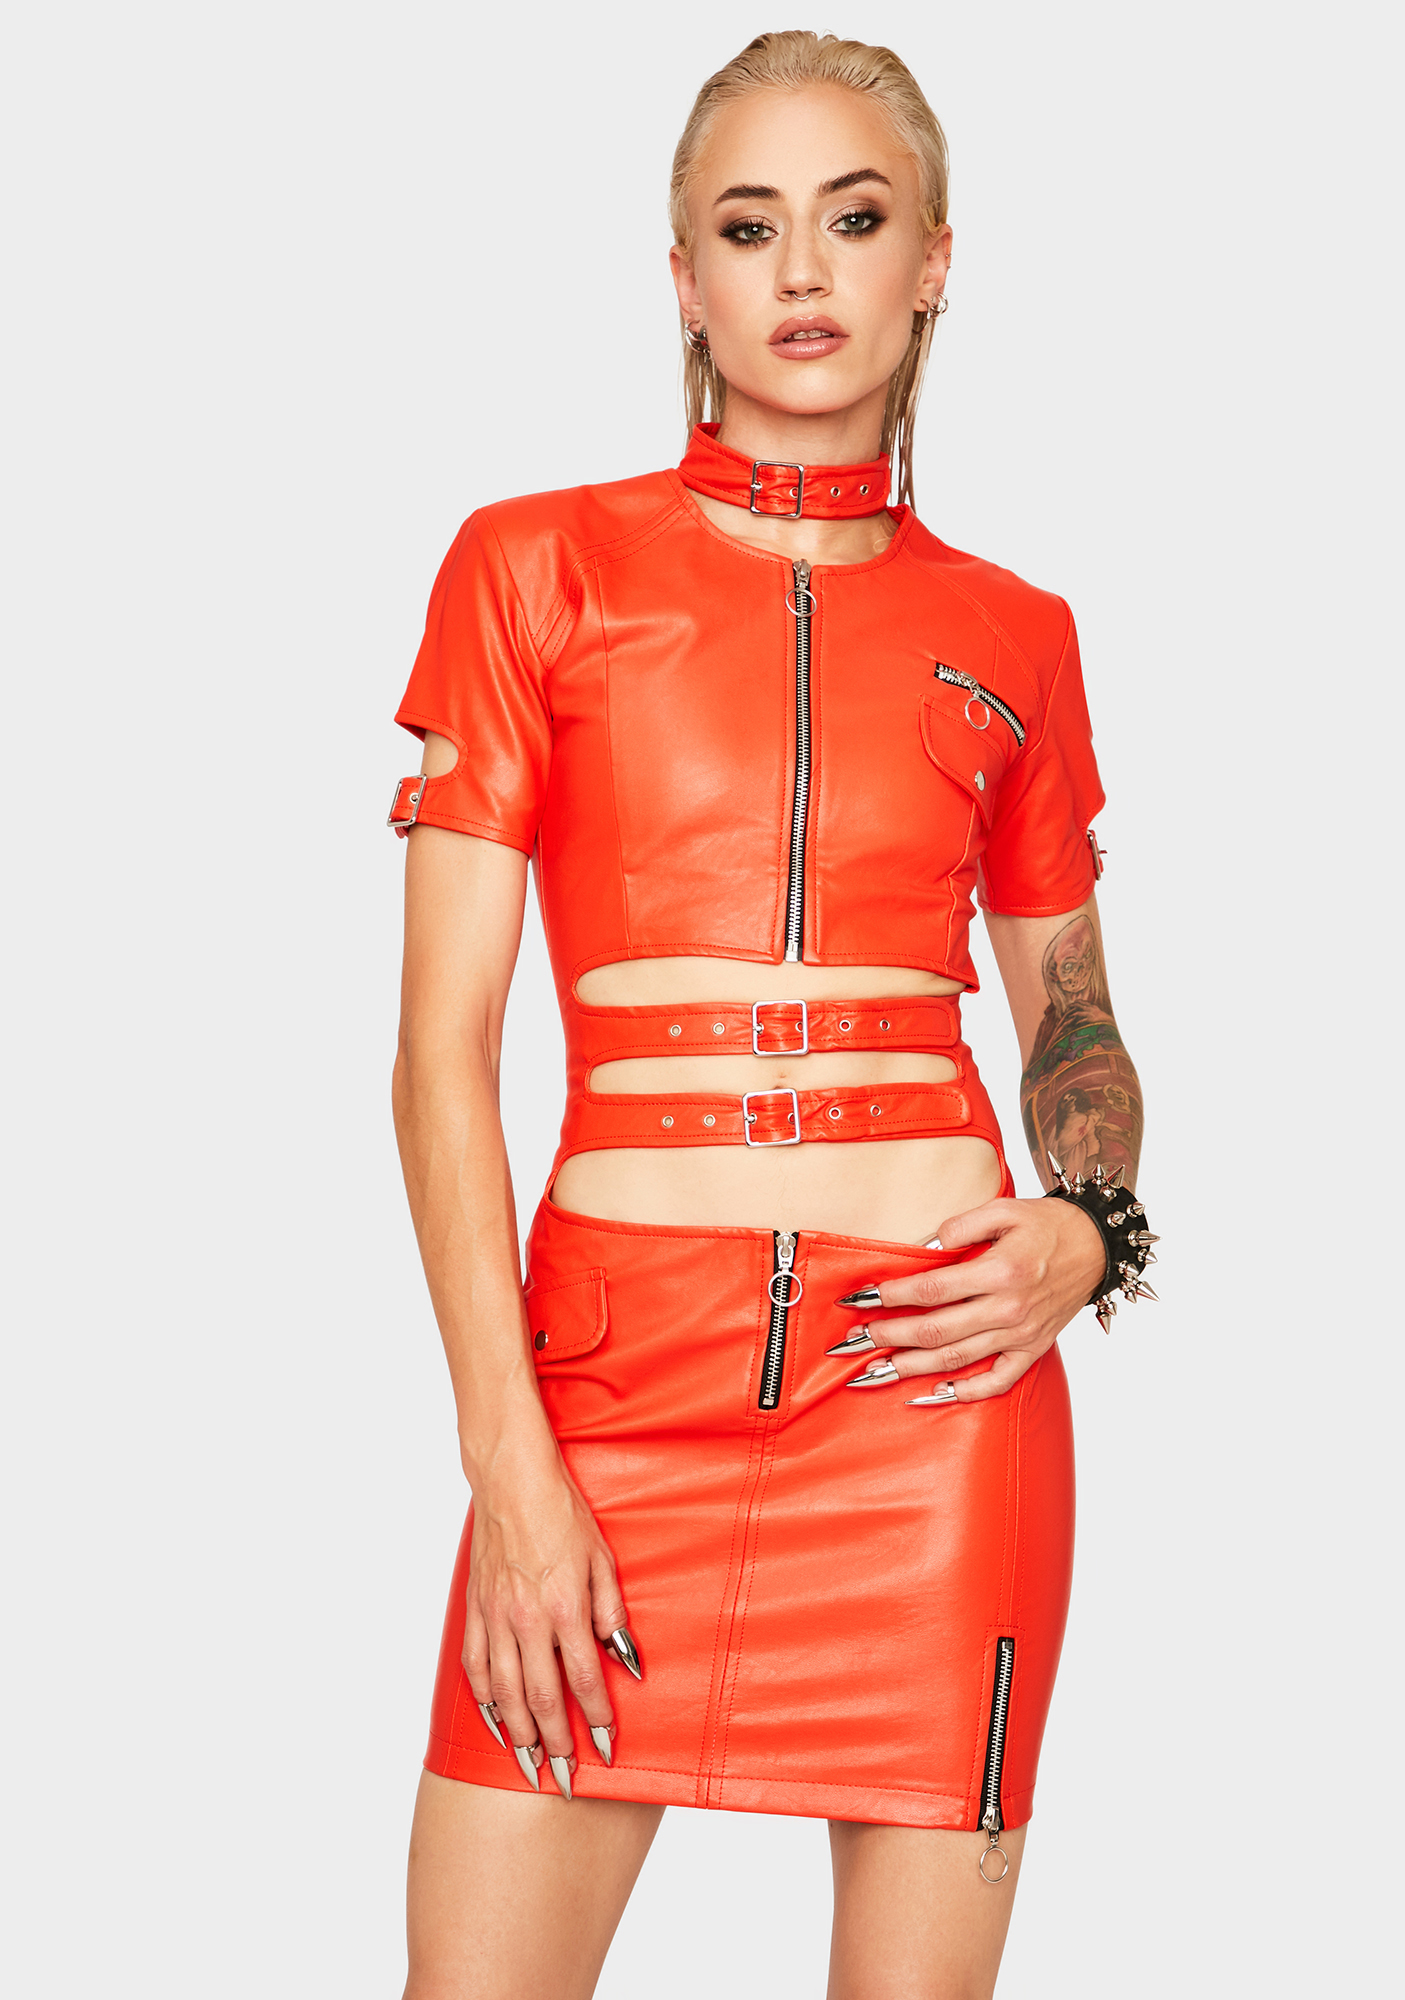 Strange Couture Red Faster Pussycat Vegan Leather Dress | Dolls Kill